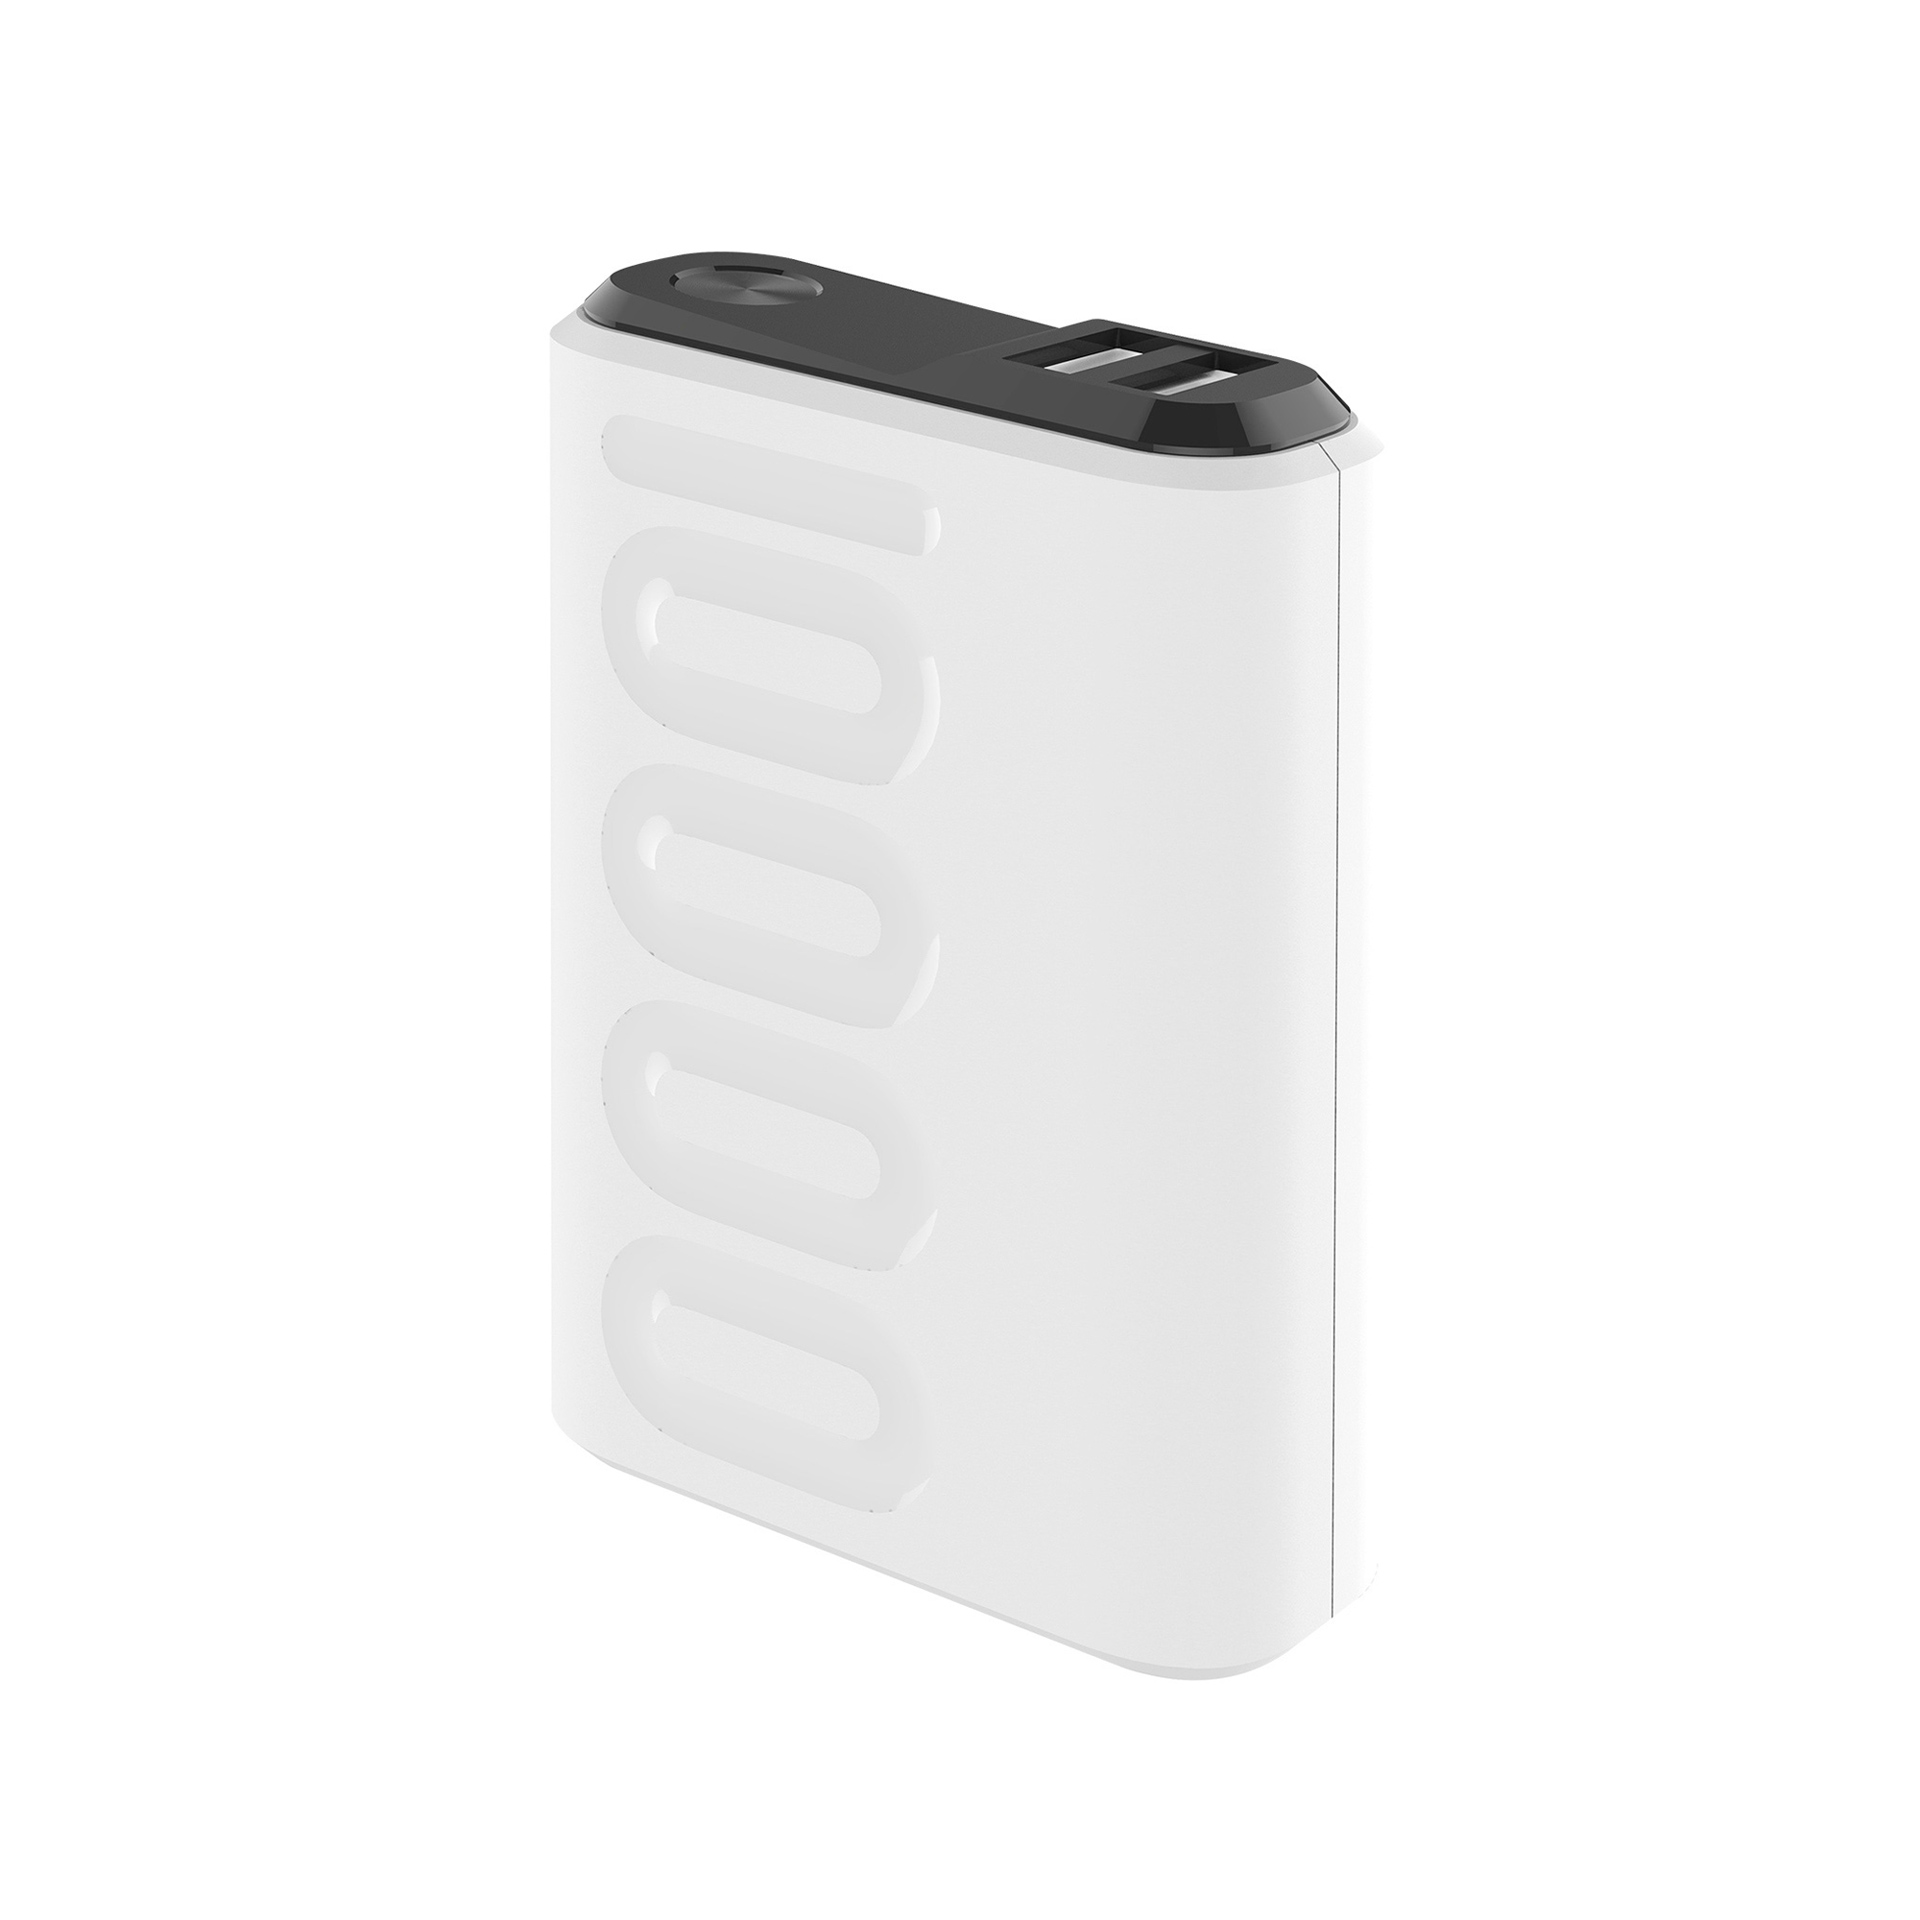 Power bank 10000 mAh Celly, , large